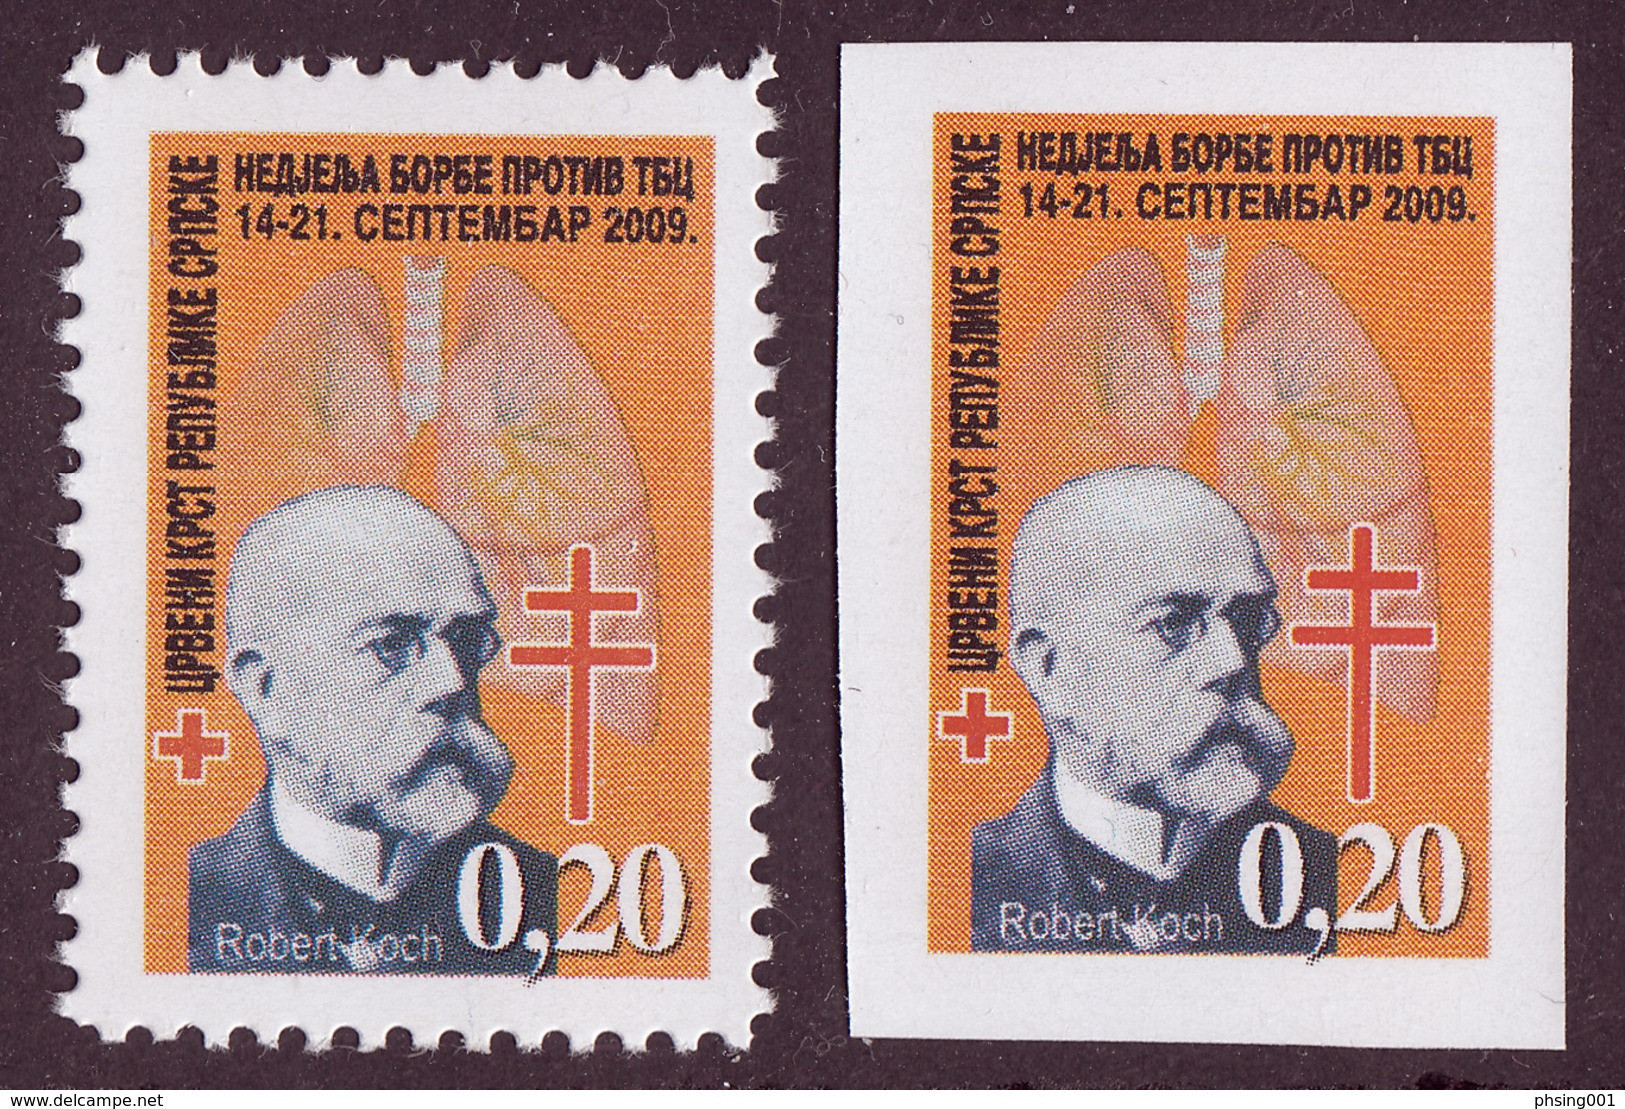 Bosnia Serbia 2009 TBC Tuberculosis Red Cross Robert Koch, Tax Charity Surcharge Stamps Perforated + Imperforated MNH - Bosnia And Herzegovina